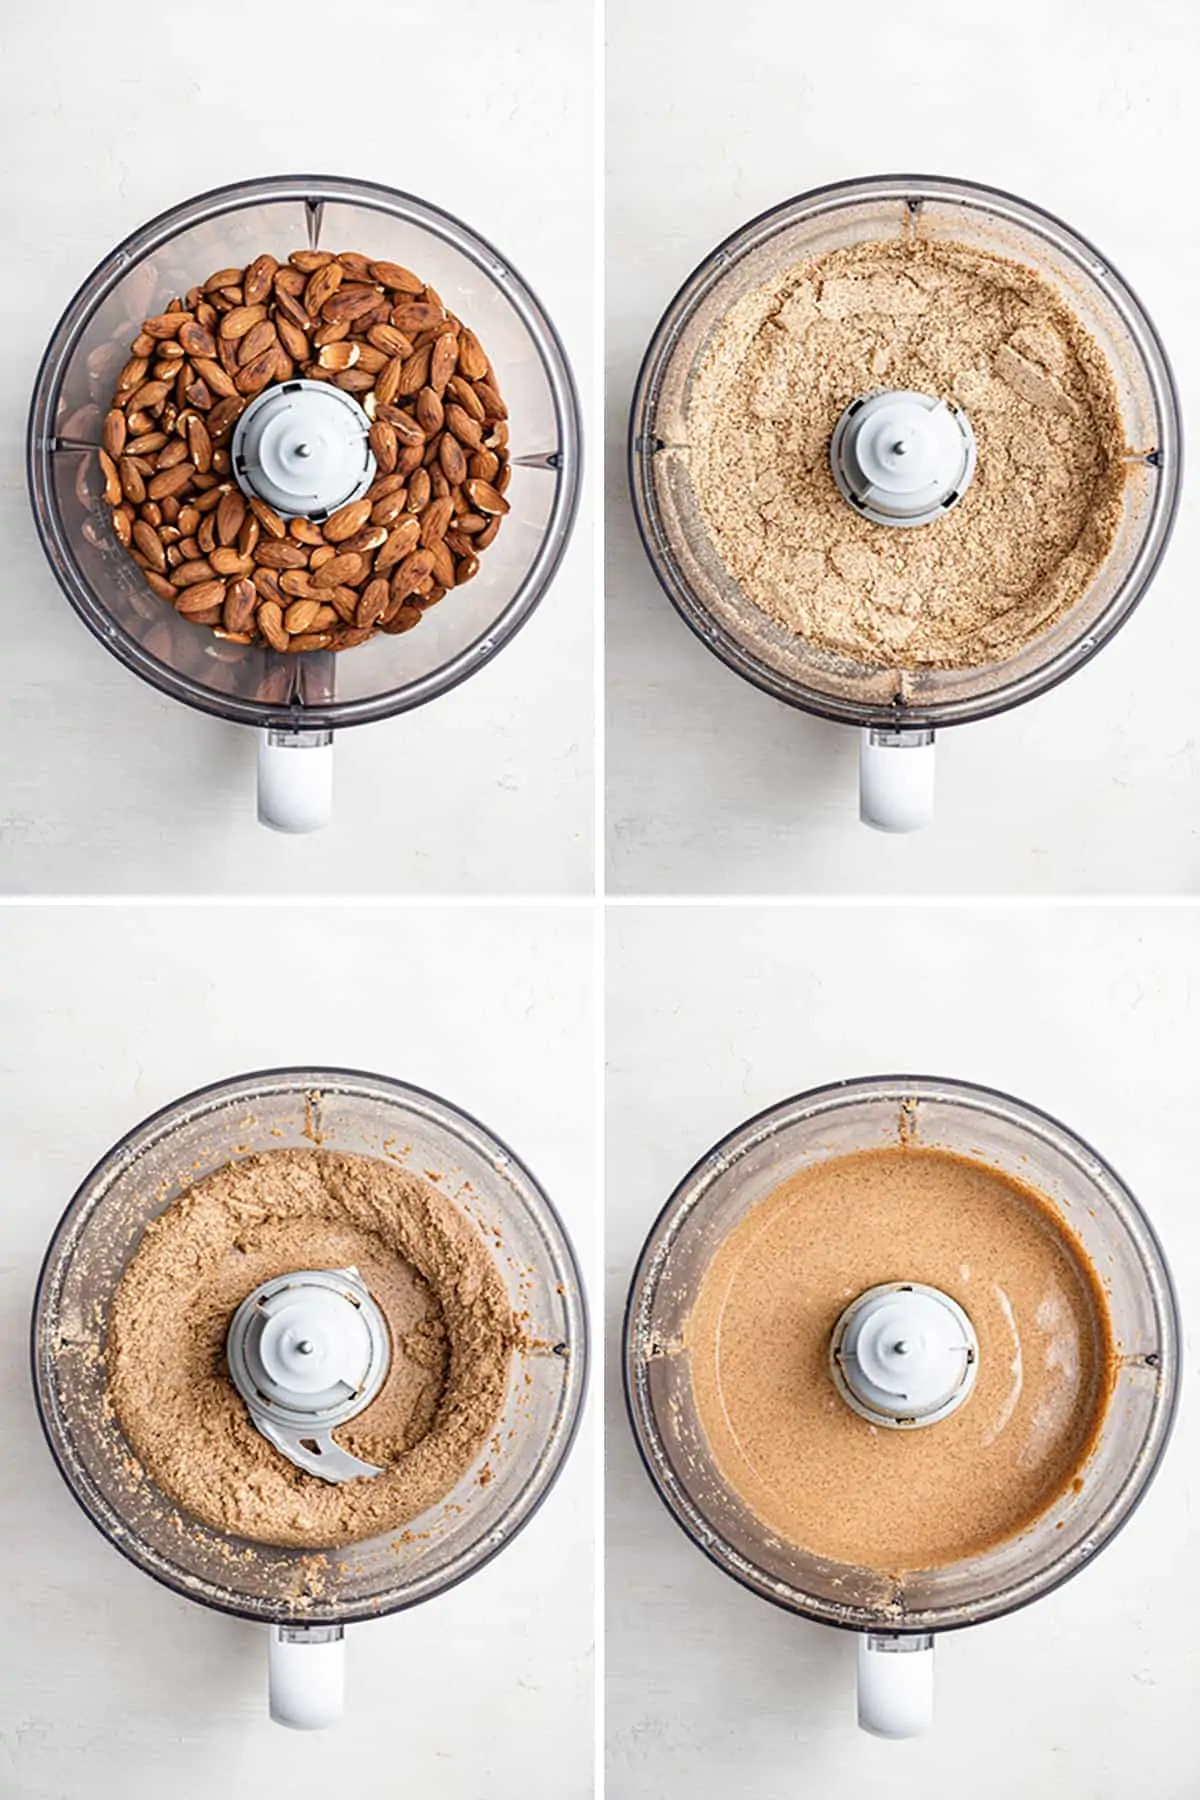 Four pictures: whole almonds in a food processor, then partially blended almonds in a food processor, then almonds blended to a paste in a food processor, then almonds blended into a smooth butter in a food processor